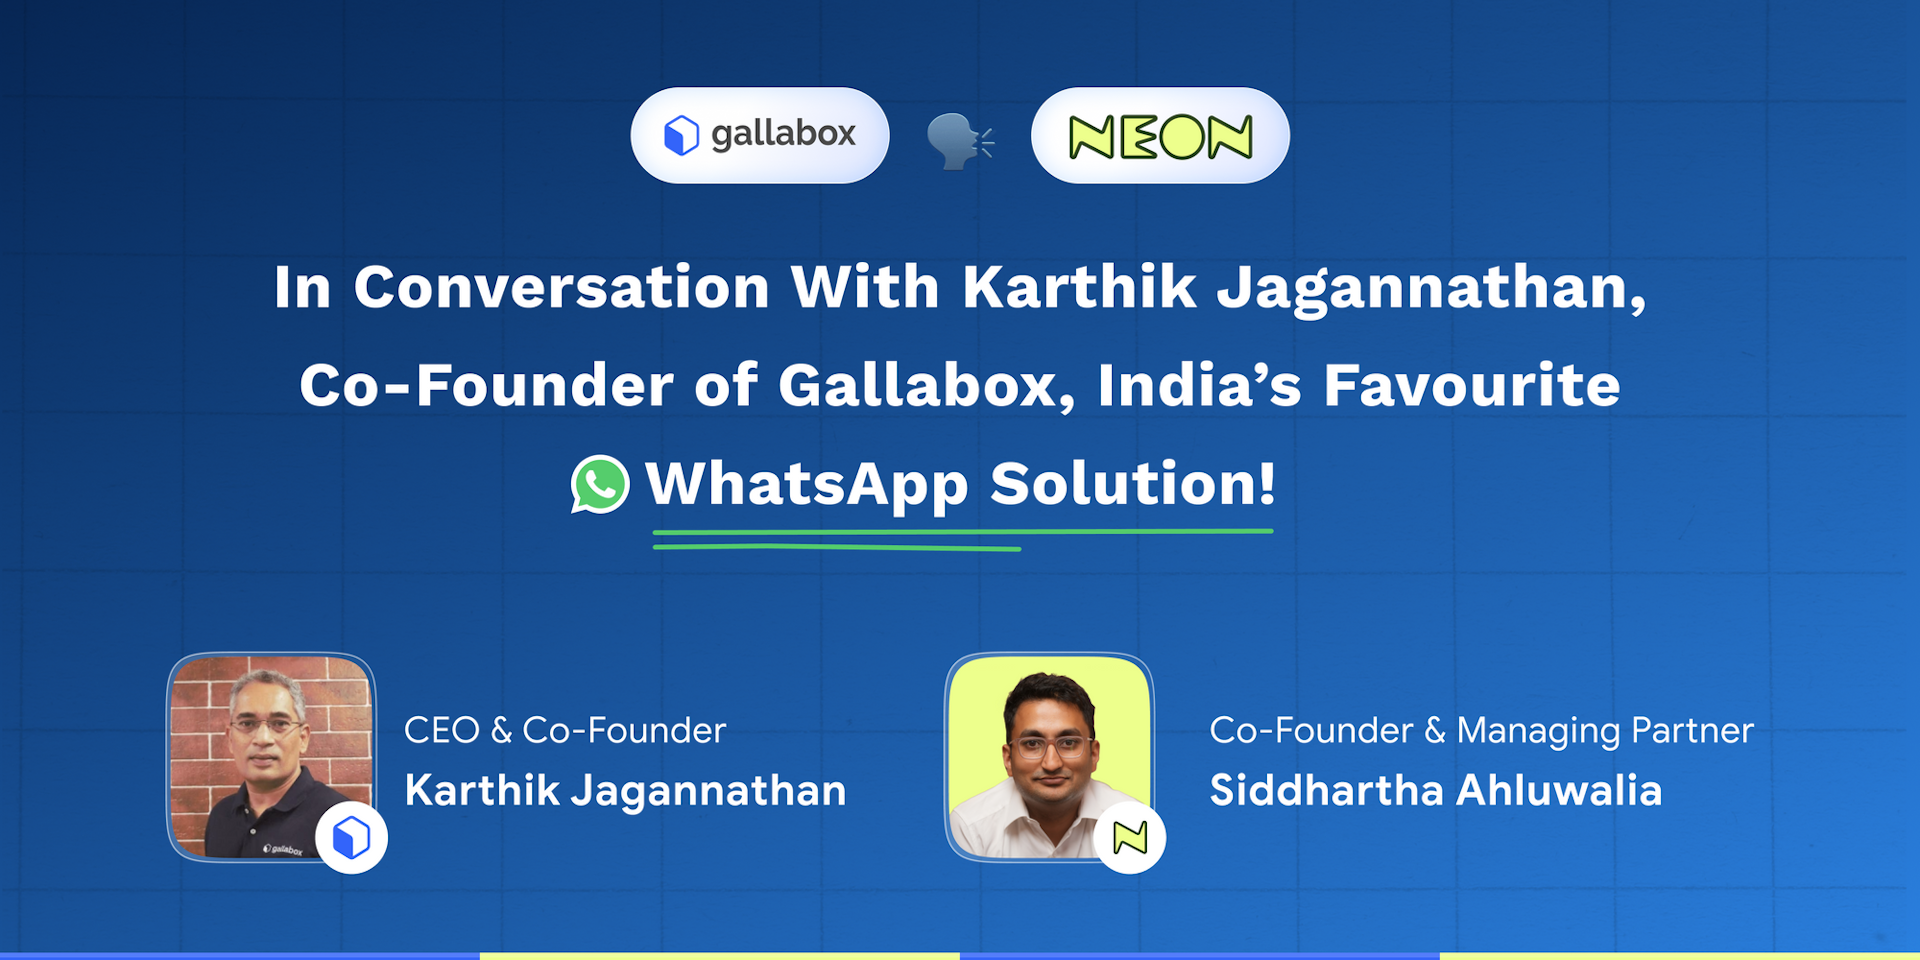 In Conversation With Karthik Jagannathan, Co-Founder of Gallabox, India’s Favourite WhatsApp Solution!